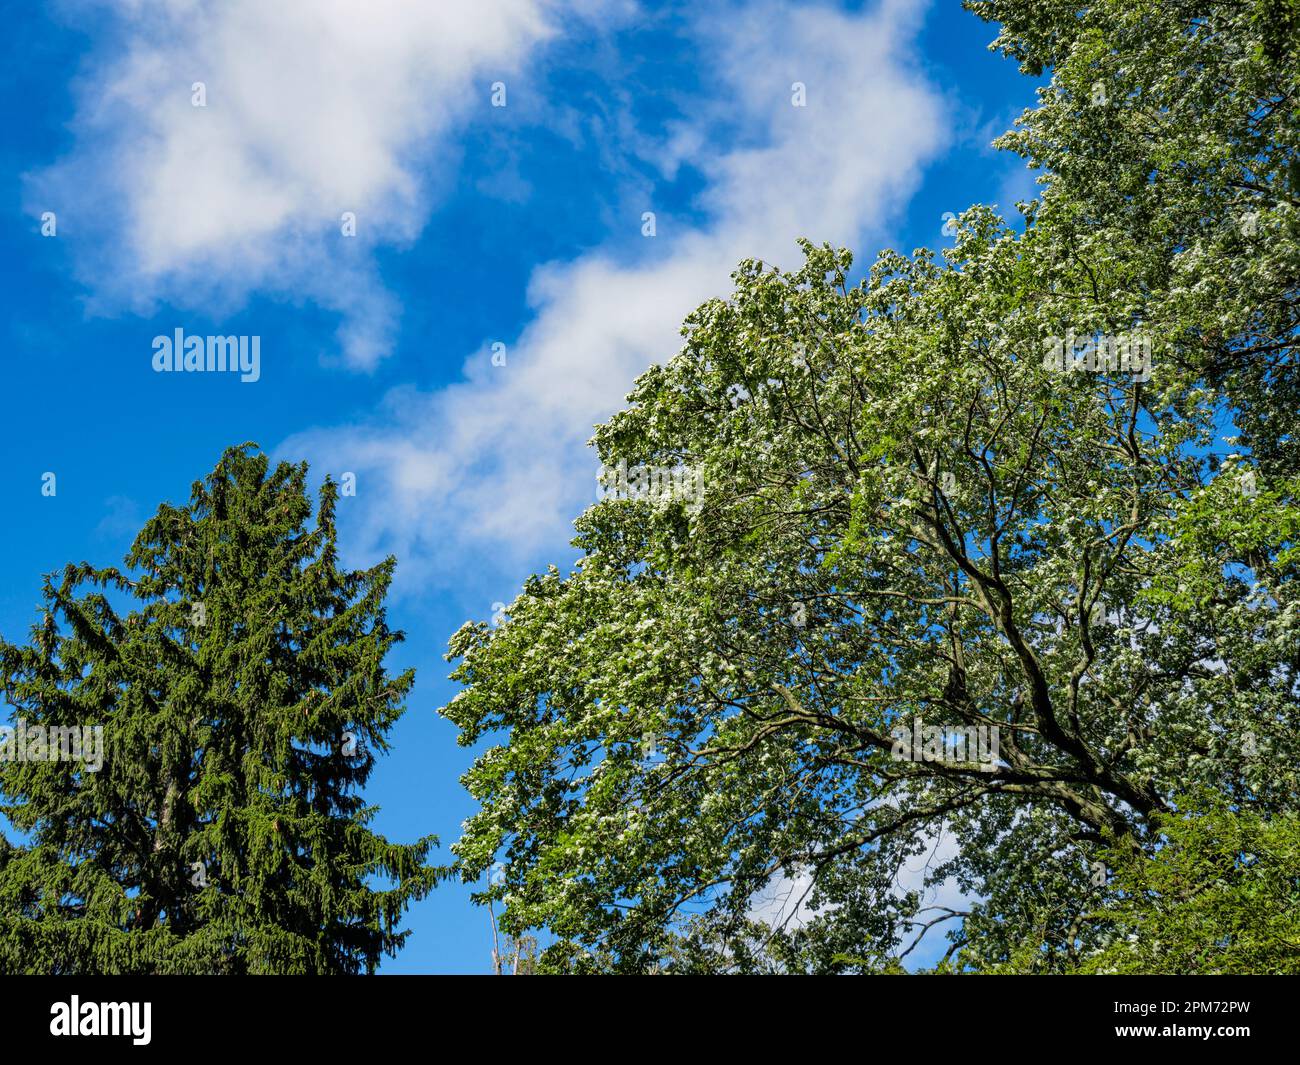 Norway spruce tree, Picea abies and Norway maple, Acer platanoides L., against a blue sky, nature background of strength and beauty. Stock Photo